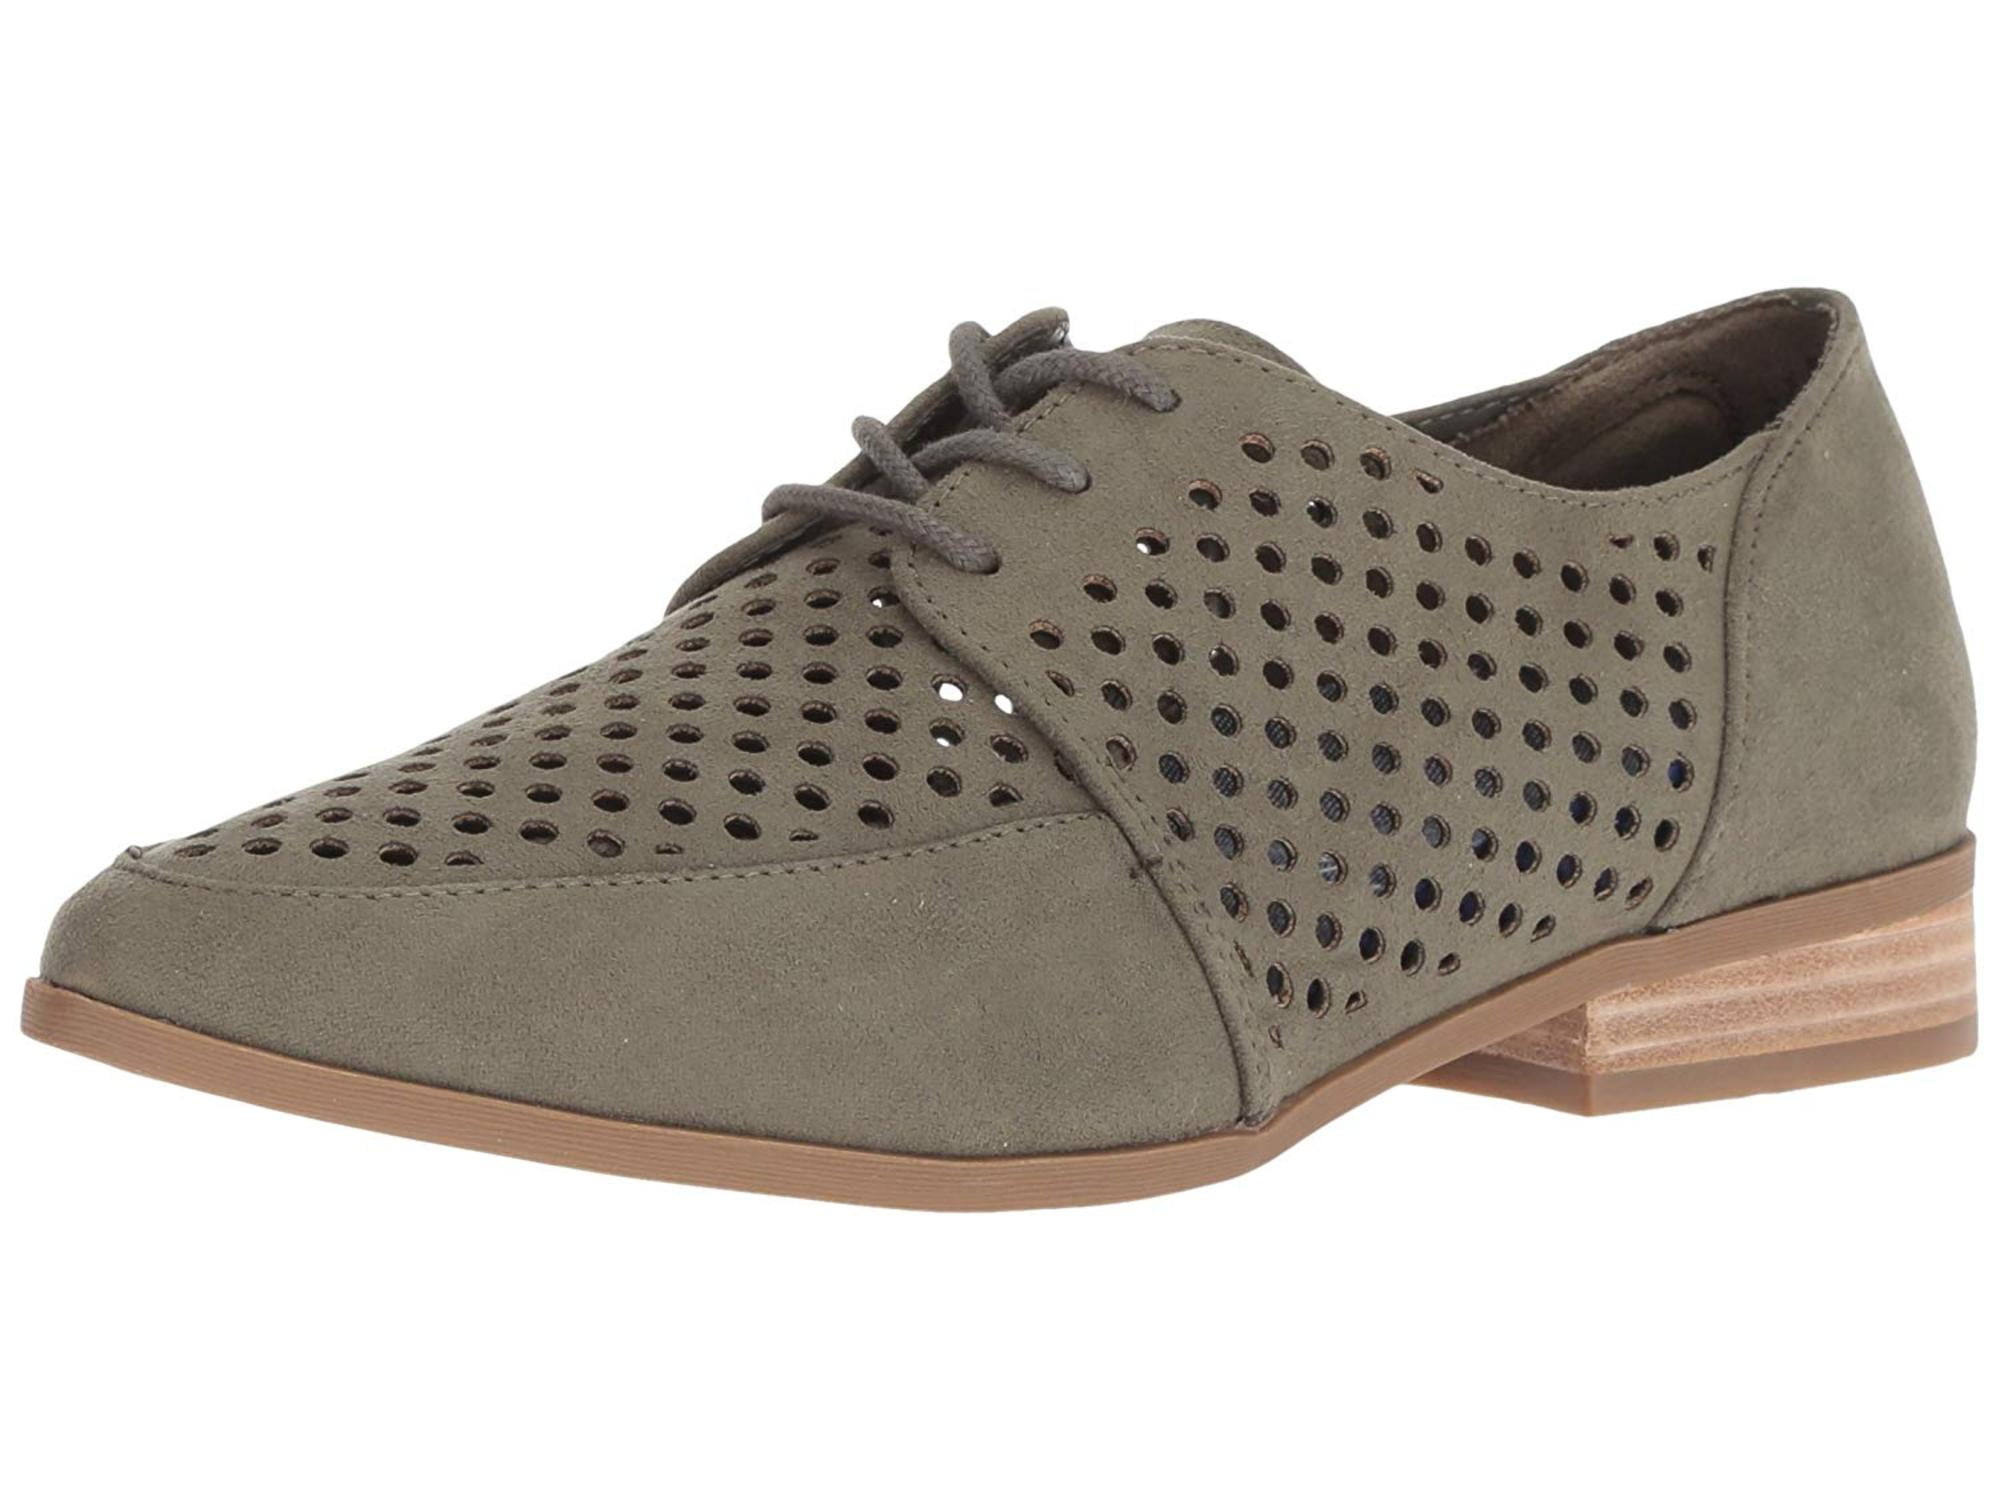 dr scholl's equal chop oxford